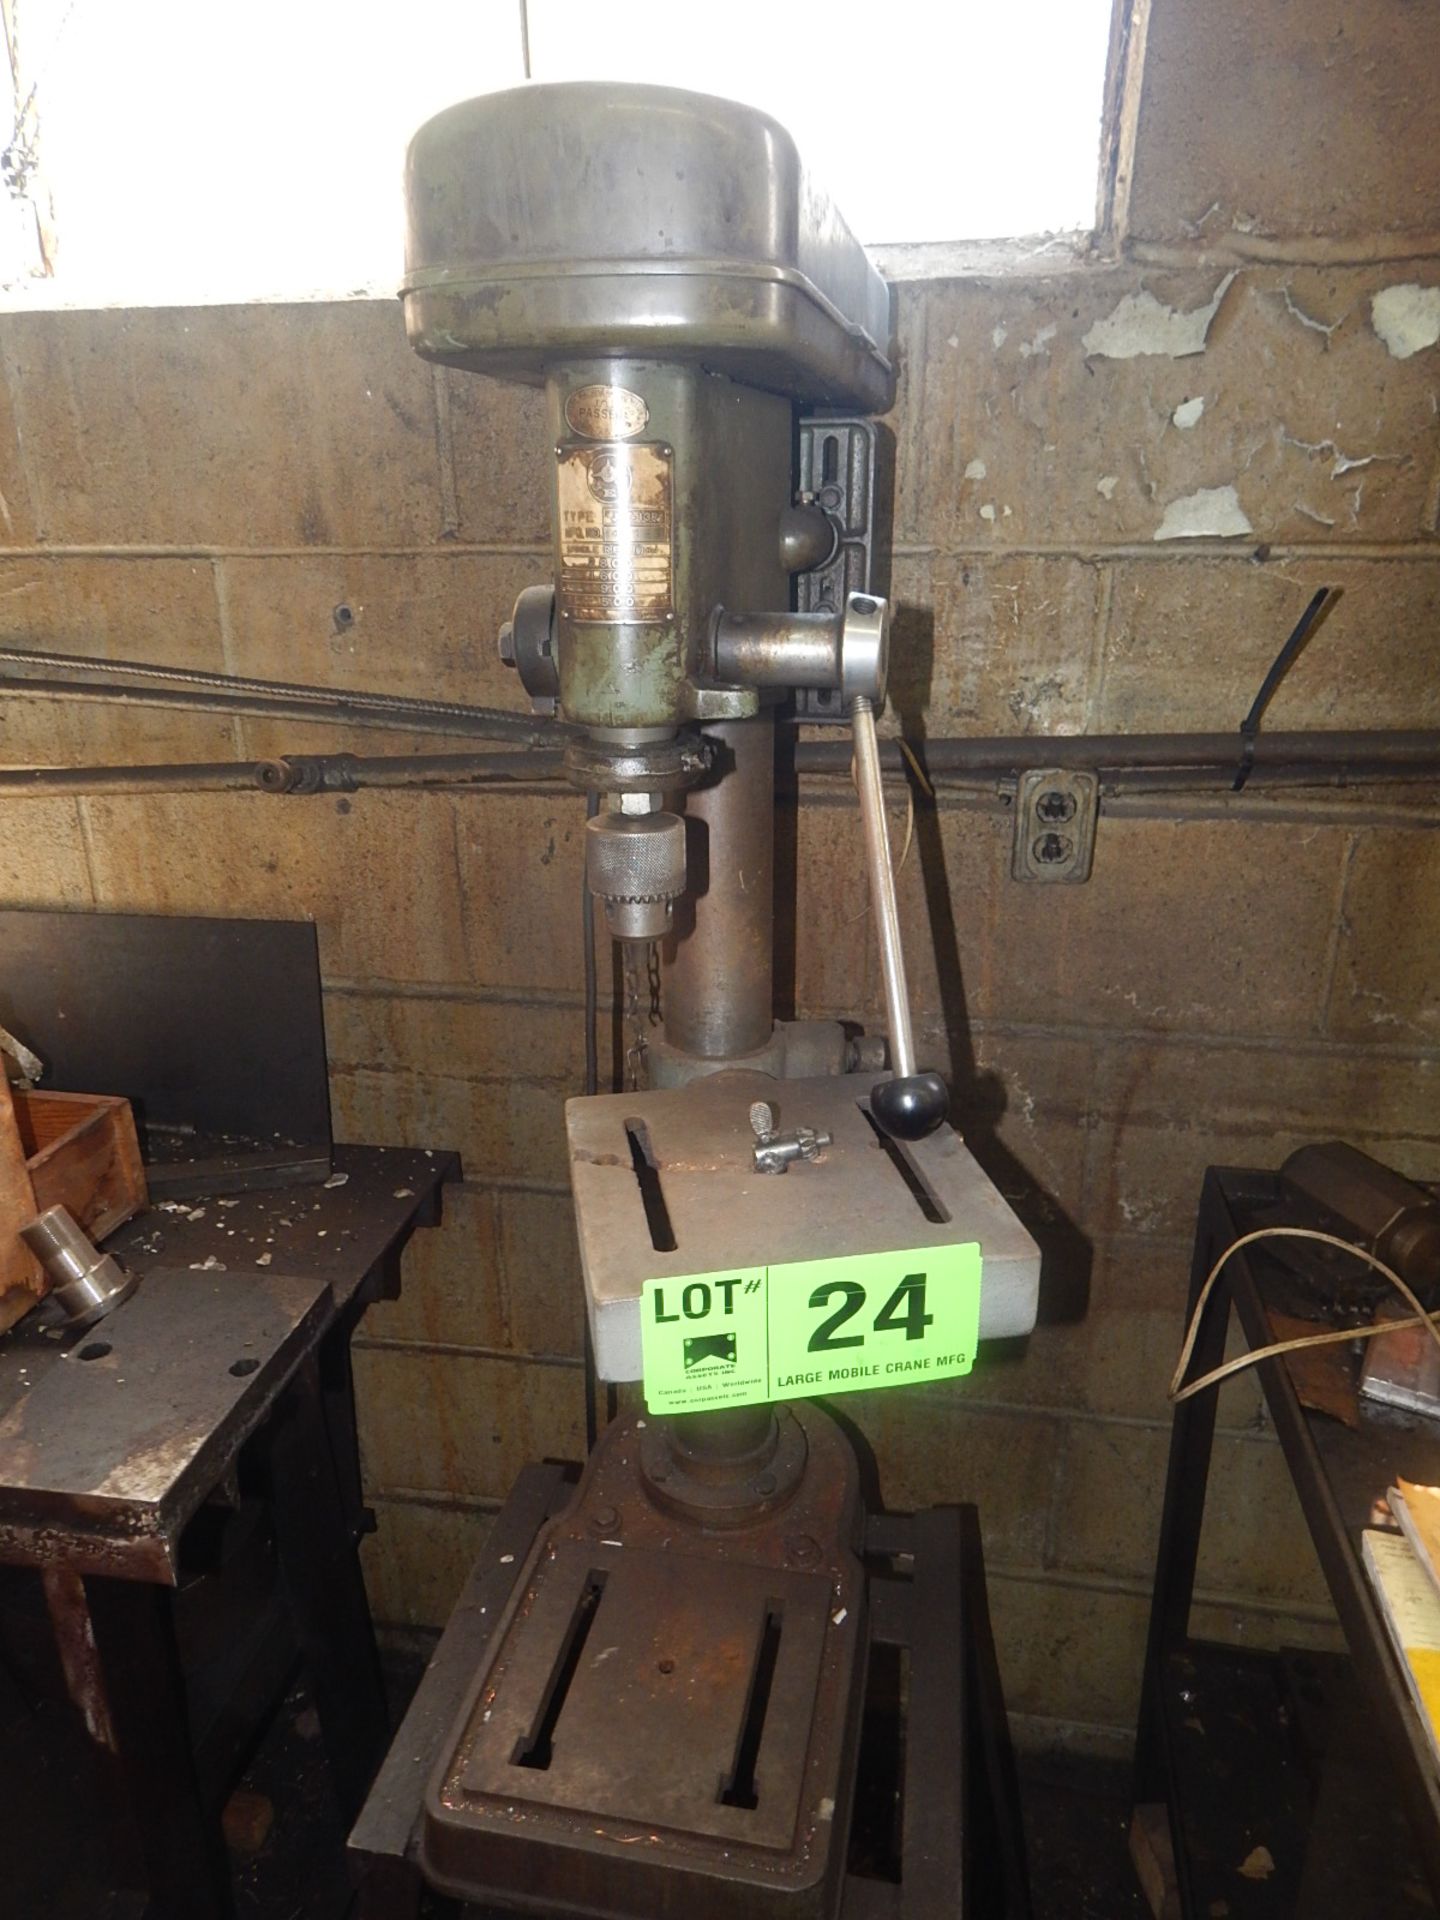 JET 13R BENCH-TYPE DRILL PRESS WITH STAND, SPEEDS TO 2800 RPM, 9.5" X 9.5" TABLE, S/N: 42132 (CI) - Image 2 of 3